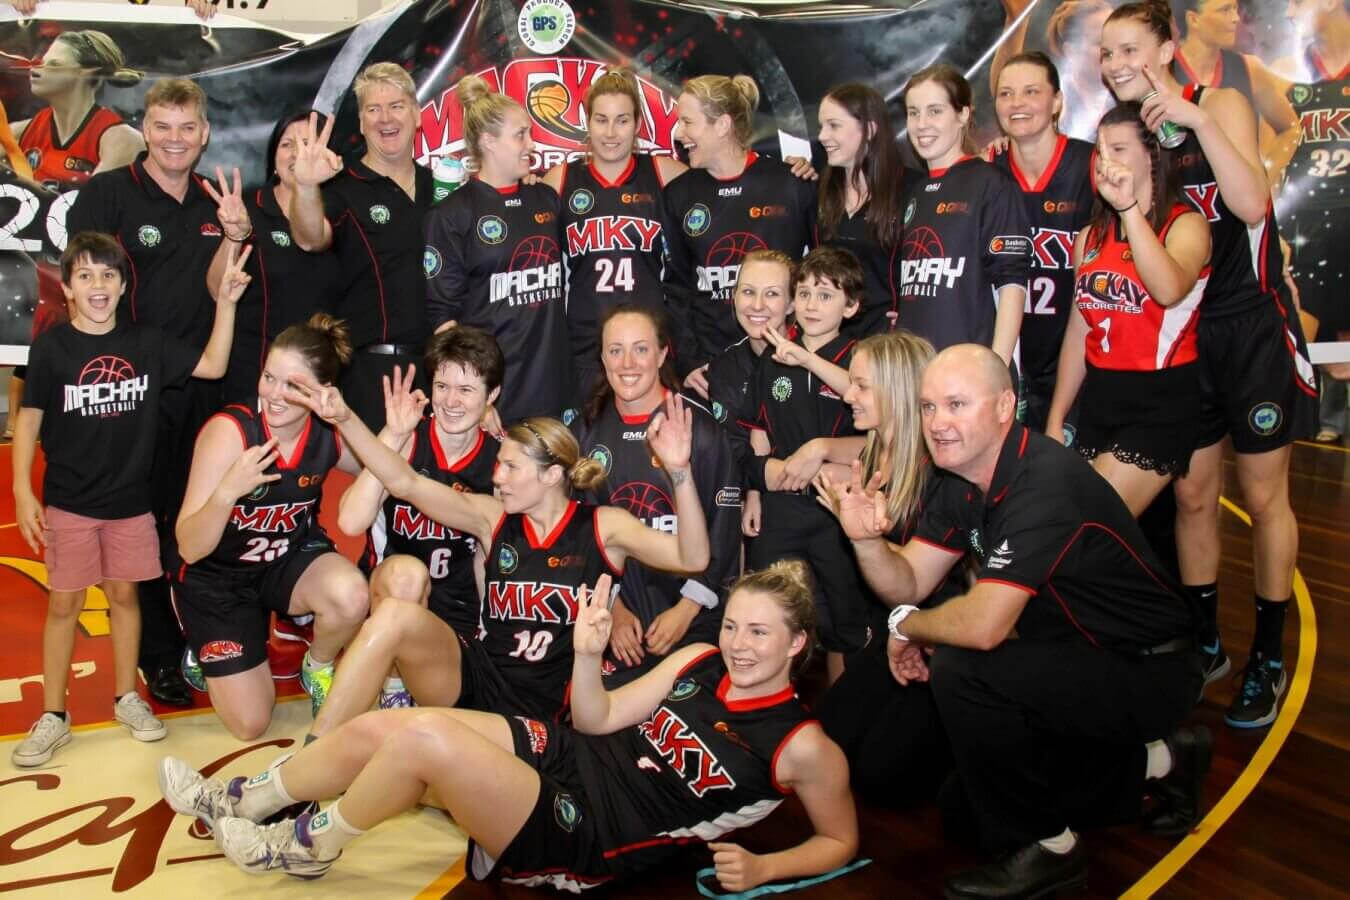 Championship Teams - 2014 Global Product Search Mackay Meteorettes Overall Record - 18 wins & 1 loss at Mackay Basketball